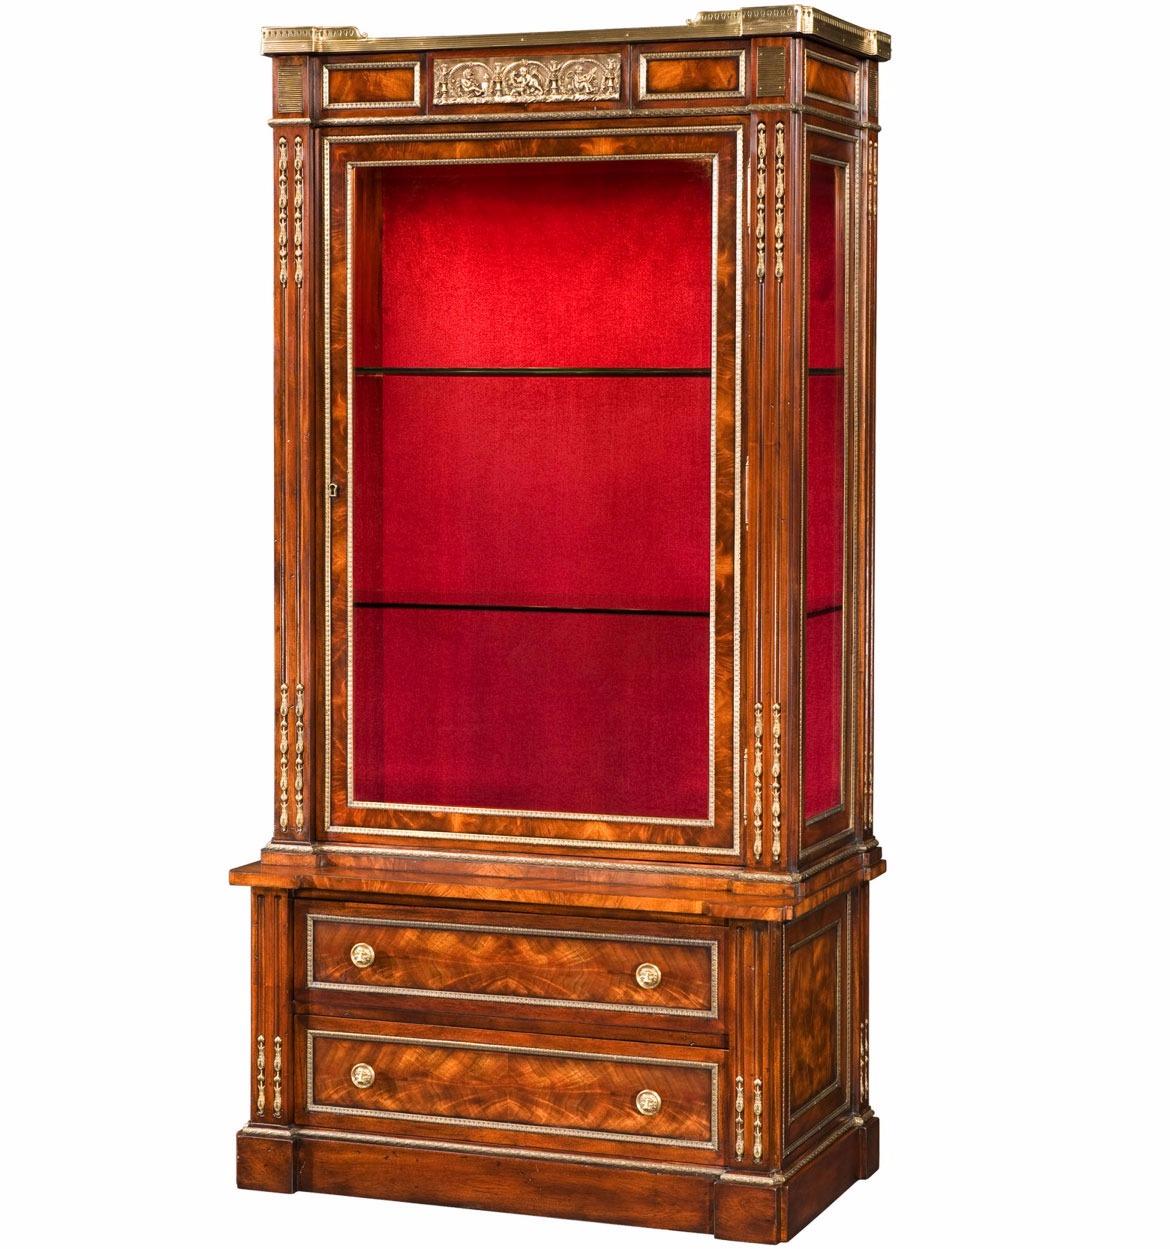 Inlay Empire Style Mahogany Bibliothèque (Display Cabinet) with Brass Mounts  For Sale